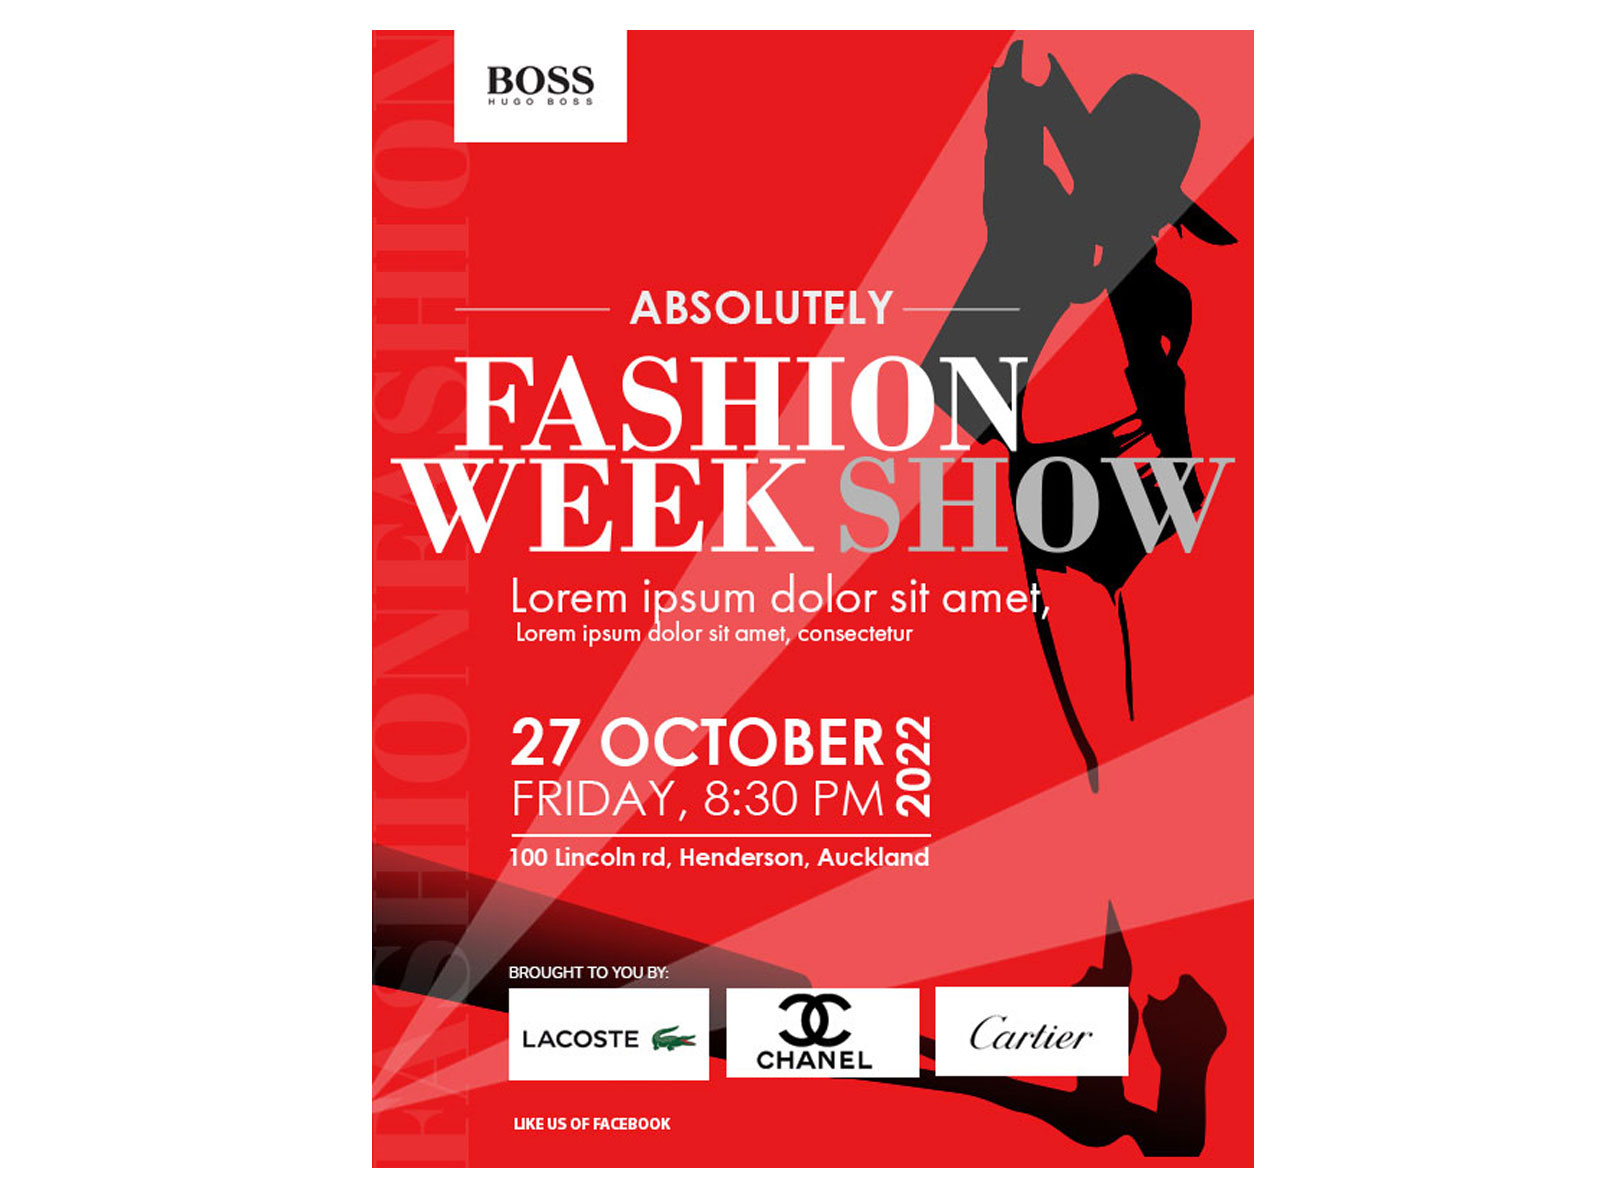 Fashion Week Show Poster by June Hernando on Dribbble